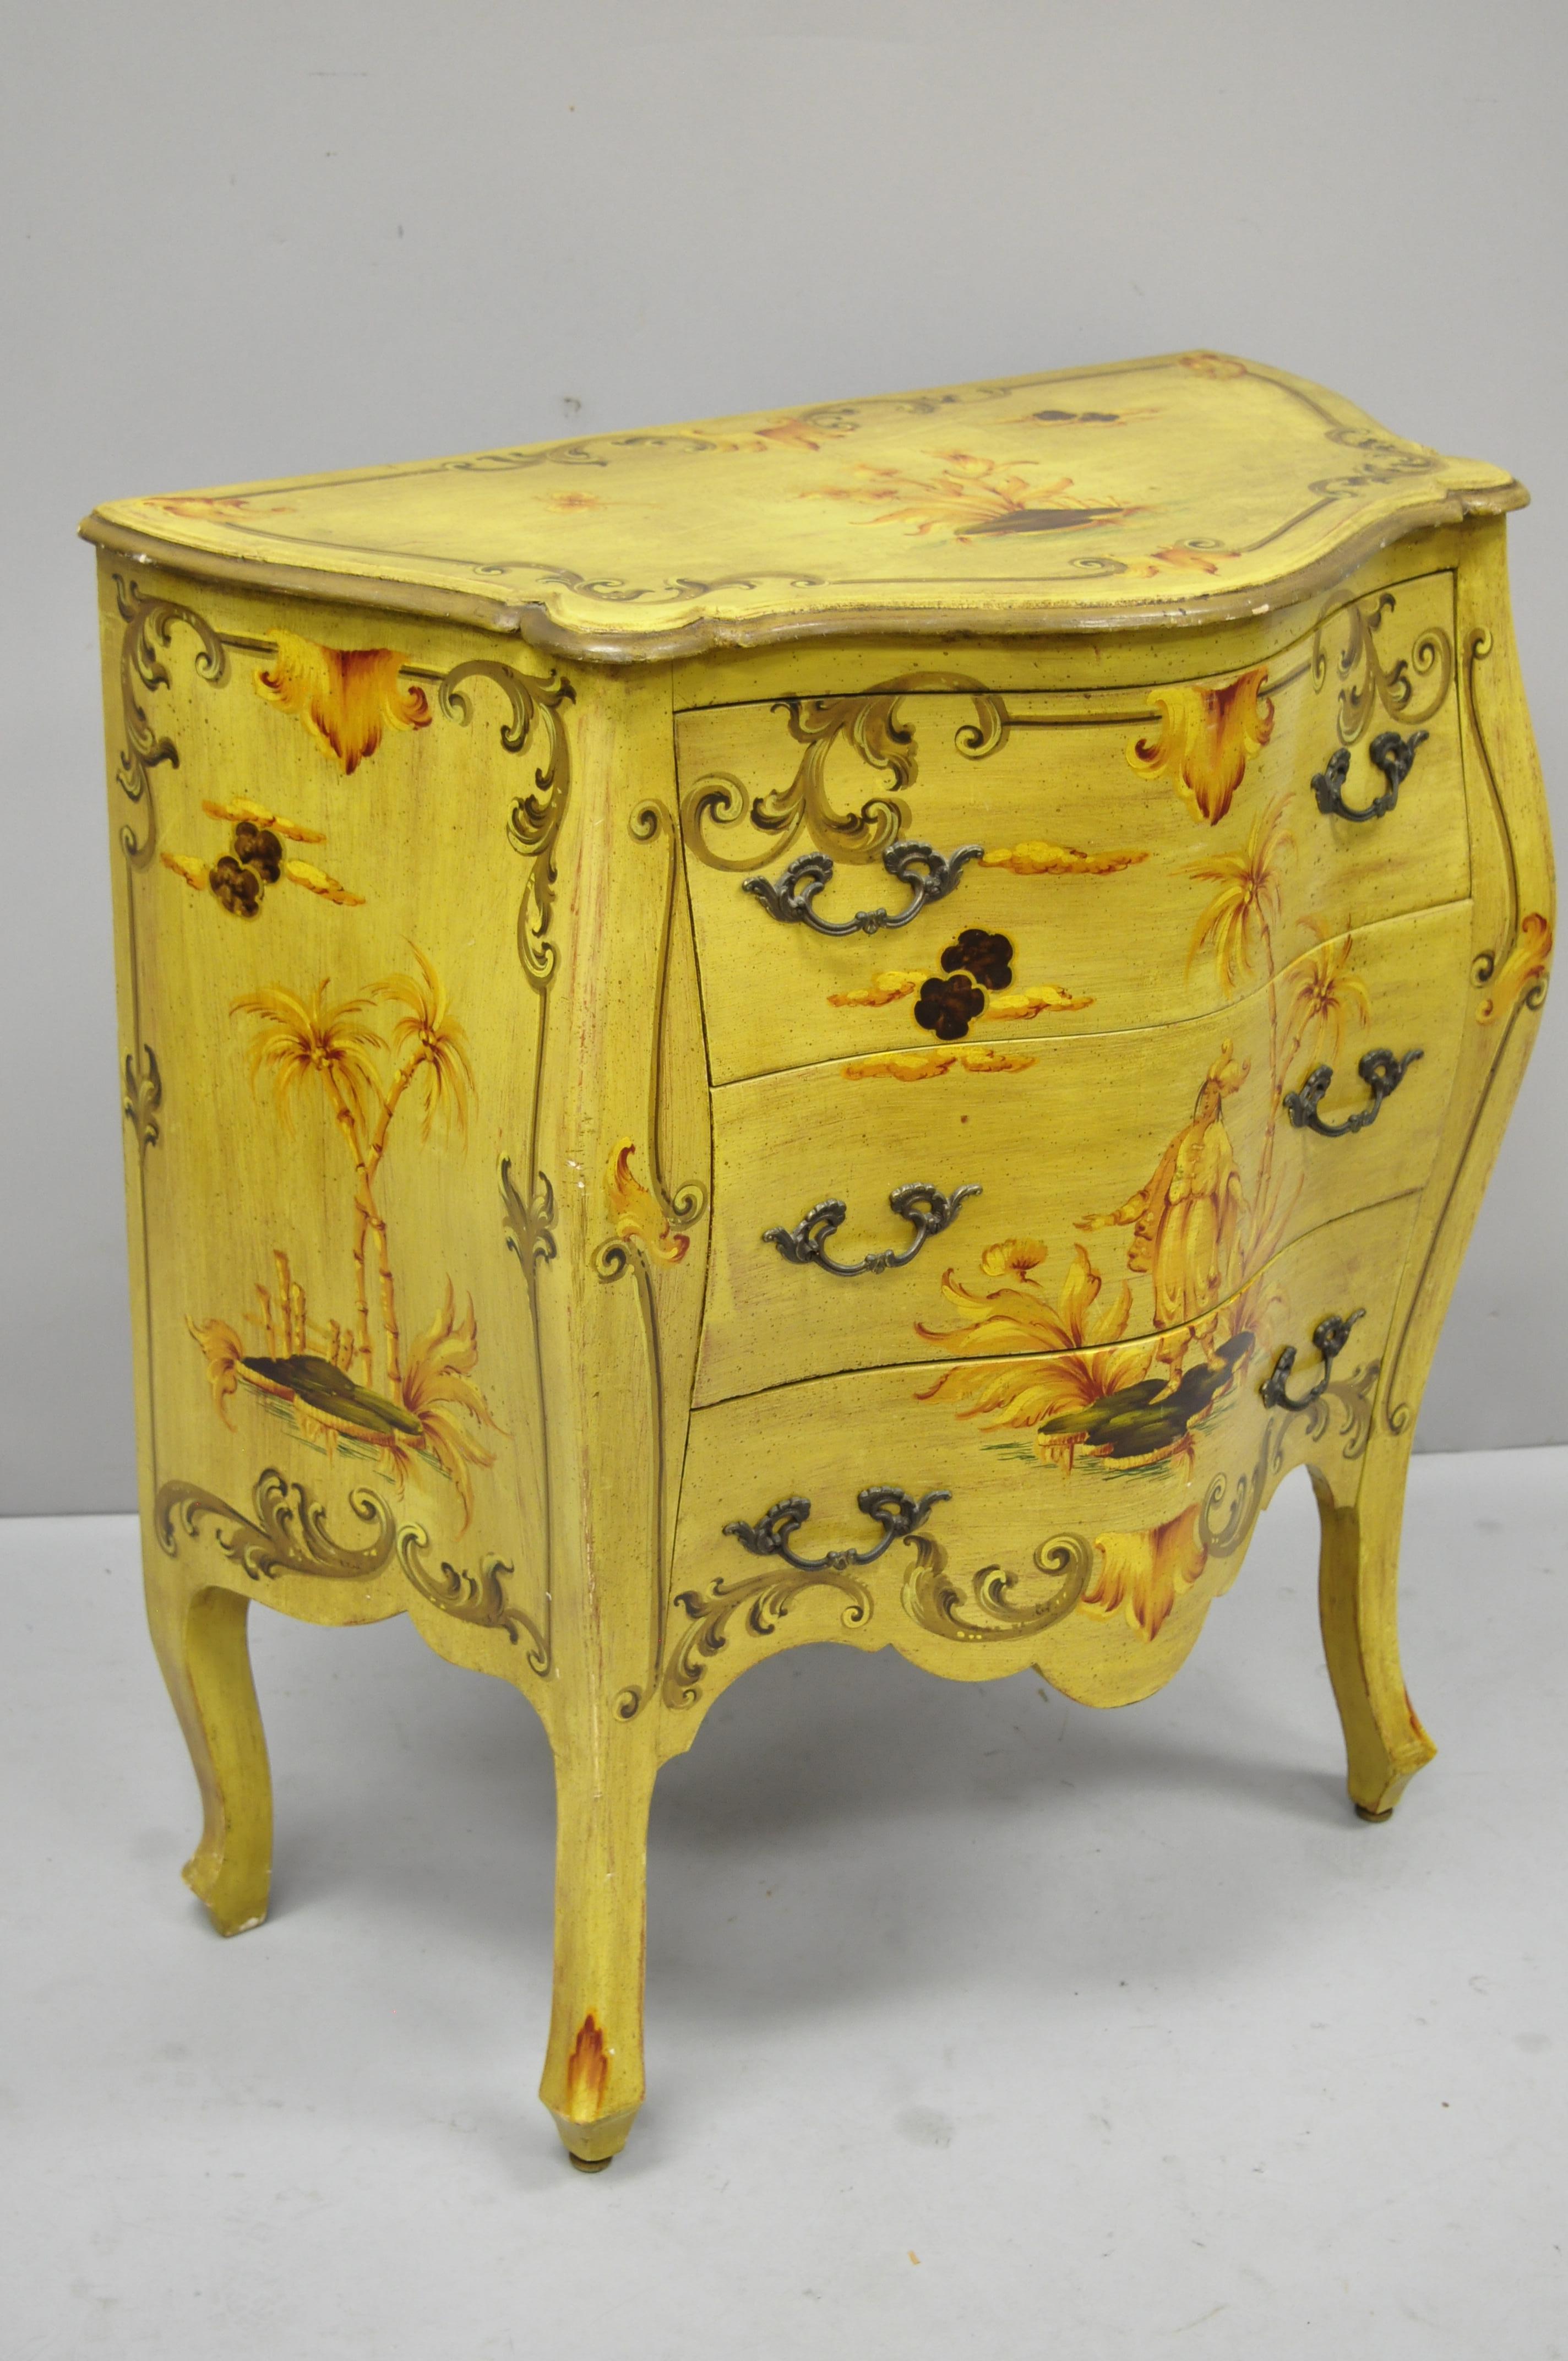 Vintage Italian hand painted yellow chinoiserie bombe commode chest. Item features hand painted scenes to front, top and sides of bamboo trees and a person, wood construction, original stamp, 3 drawers, quality Italian craftsmanship, great style and